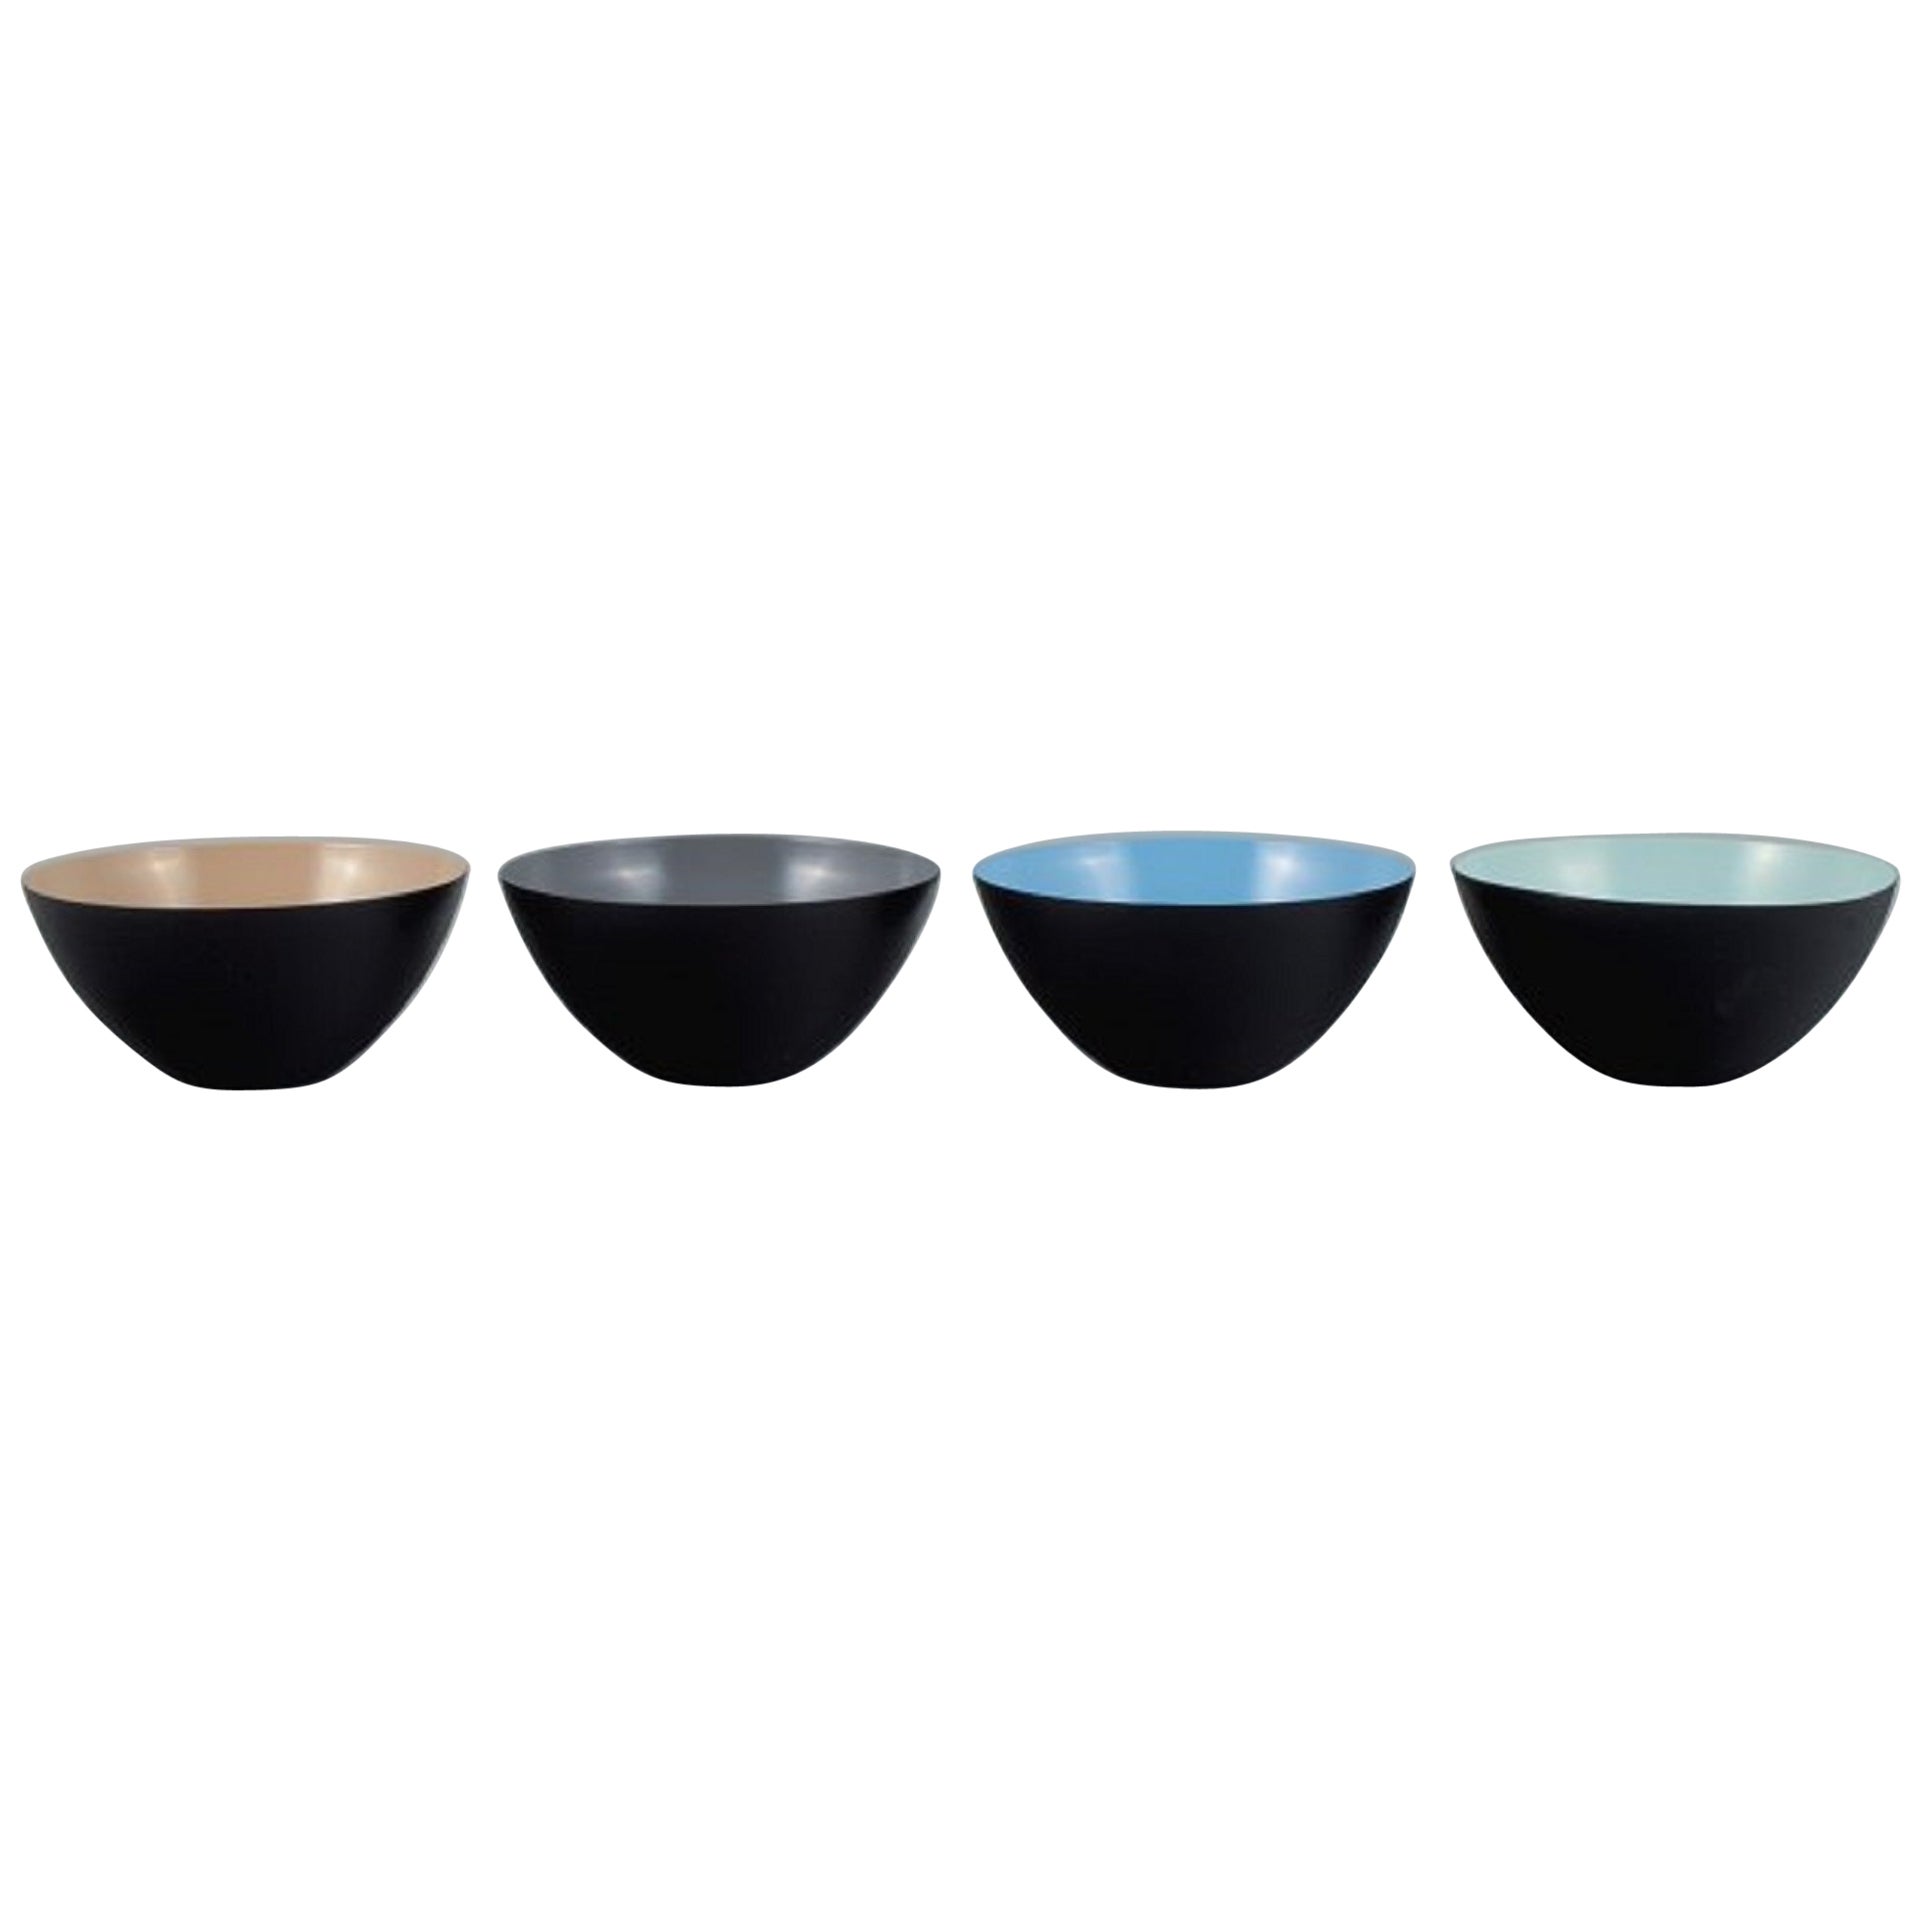 Four Small Krenit Bowls in Metal. Design by Hermann Krenchel